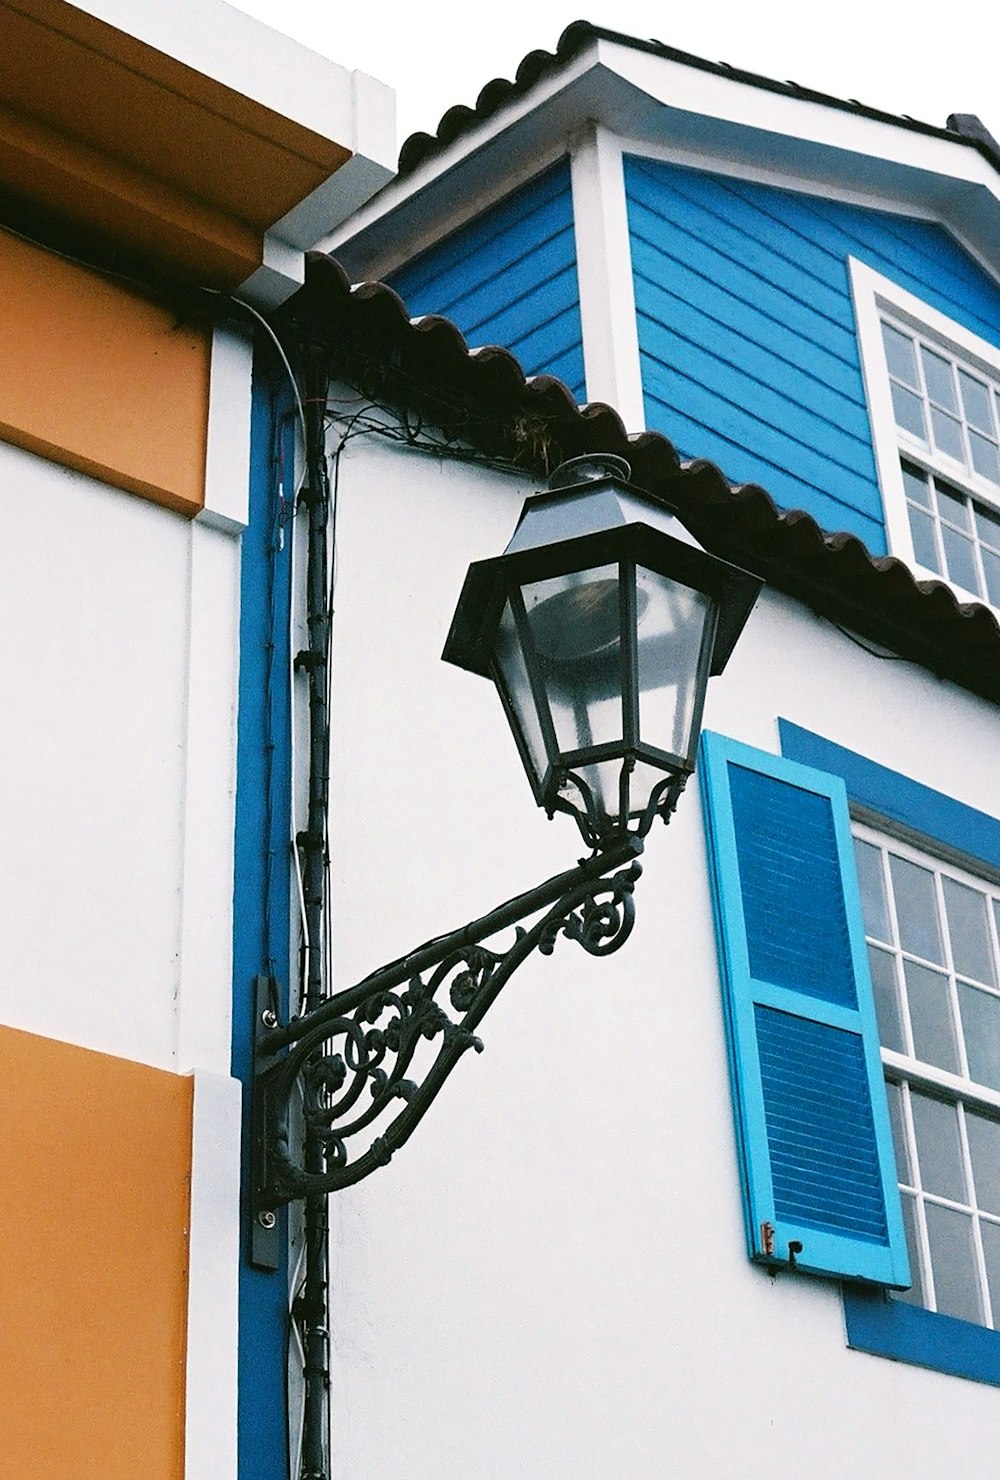 a street light next to a building with blue shutters